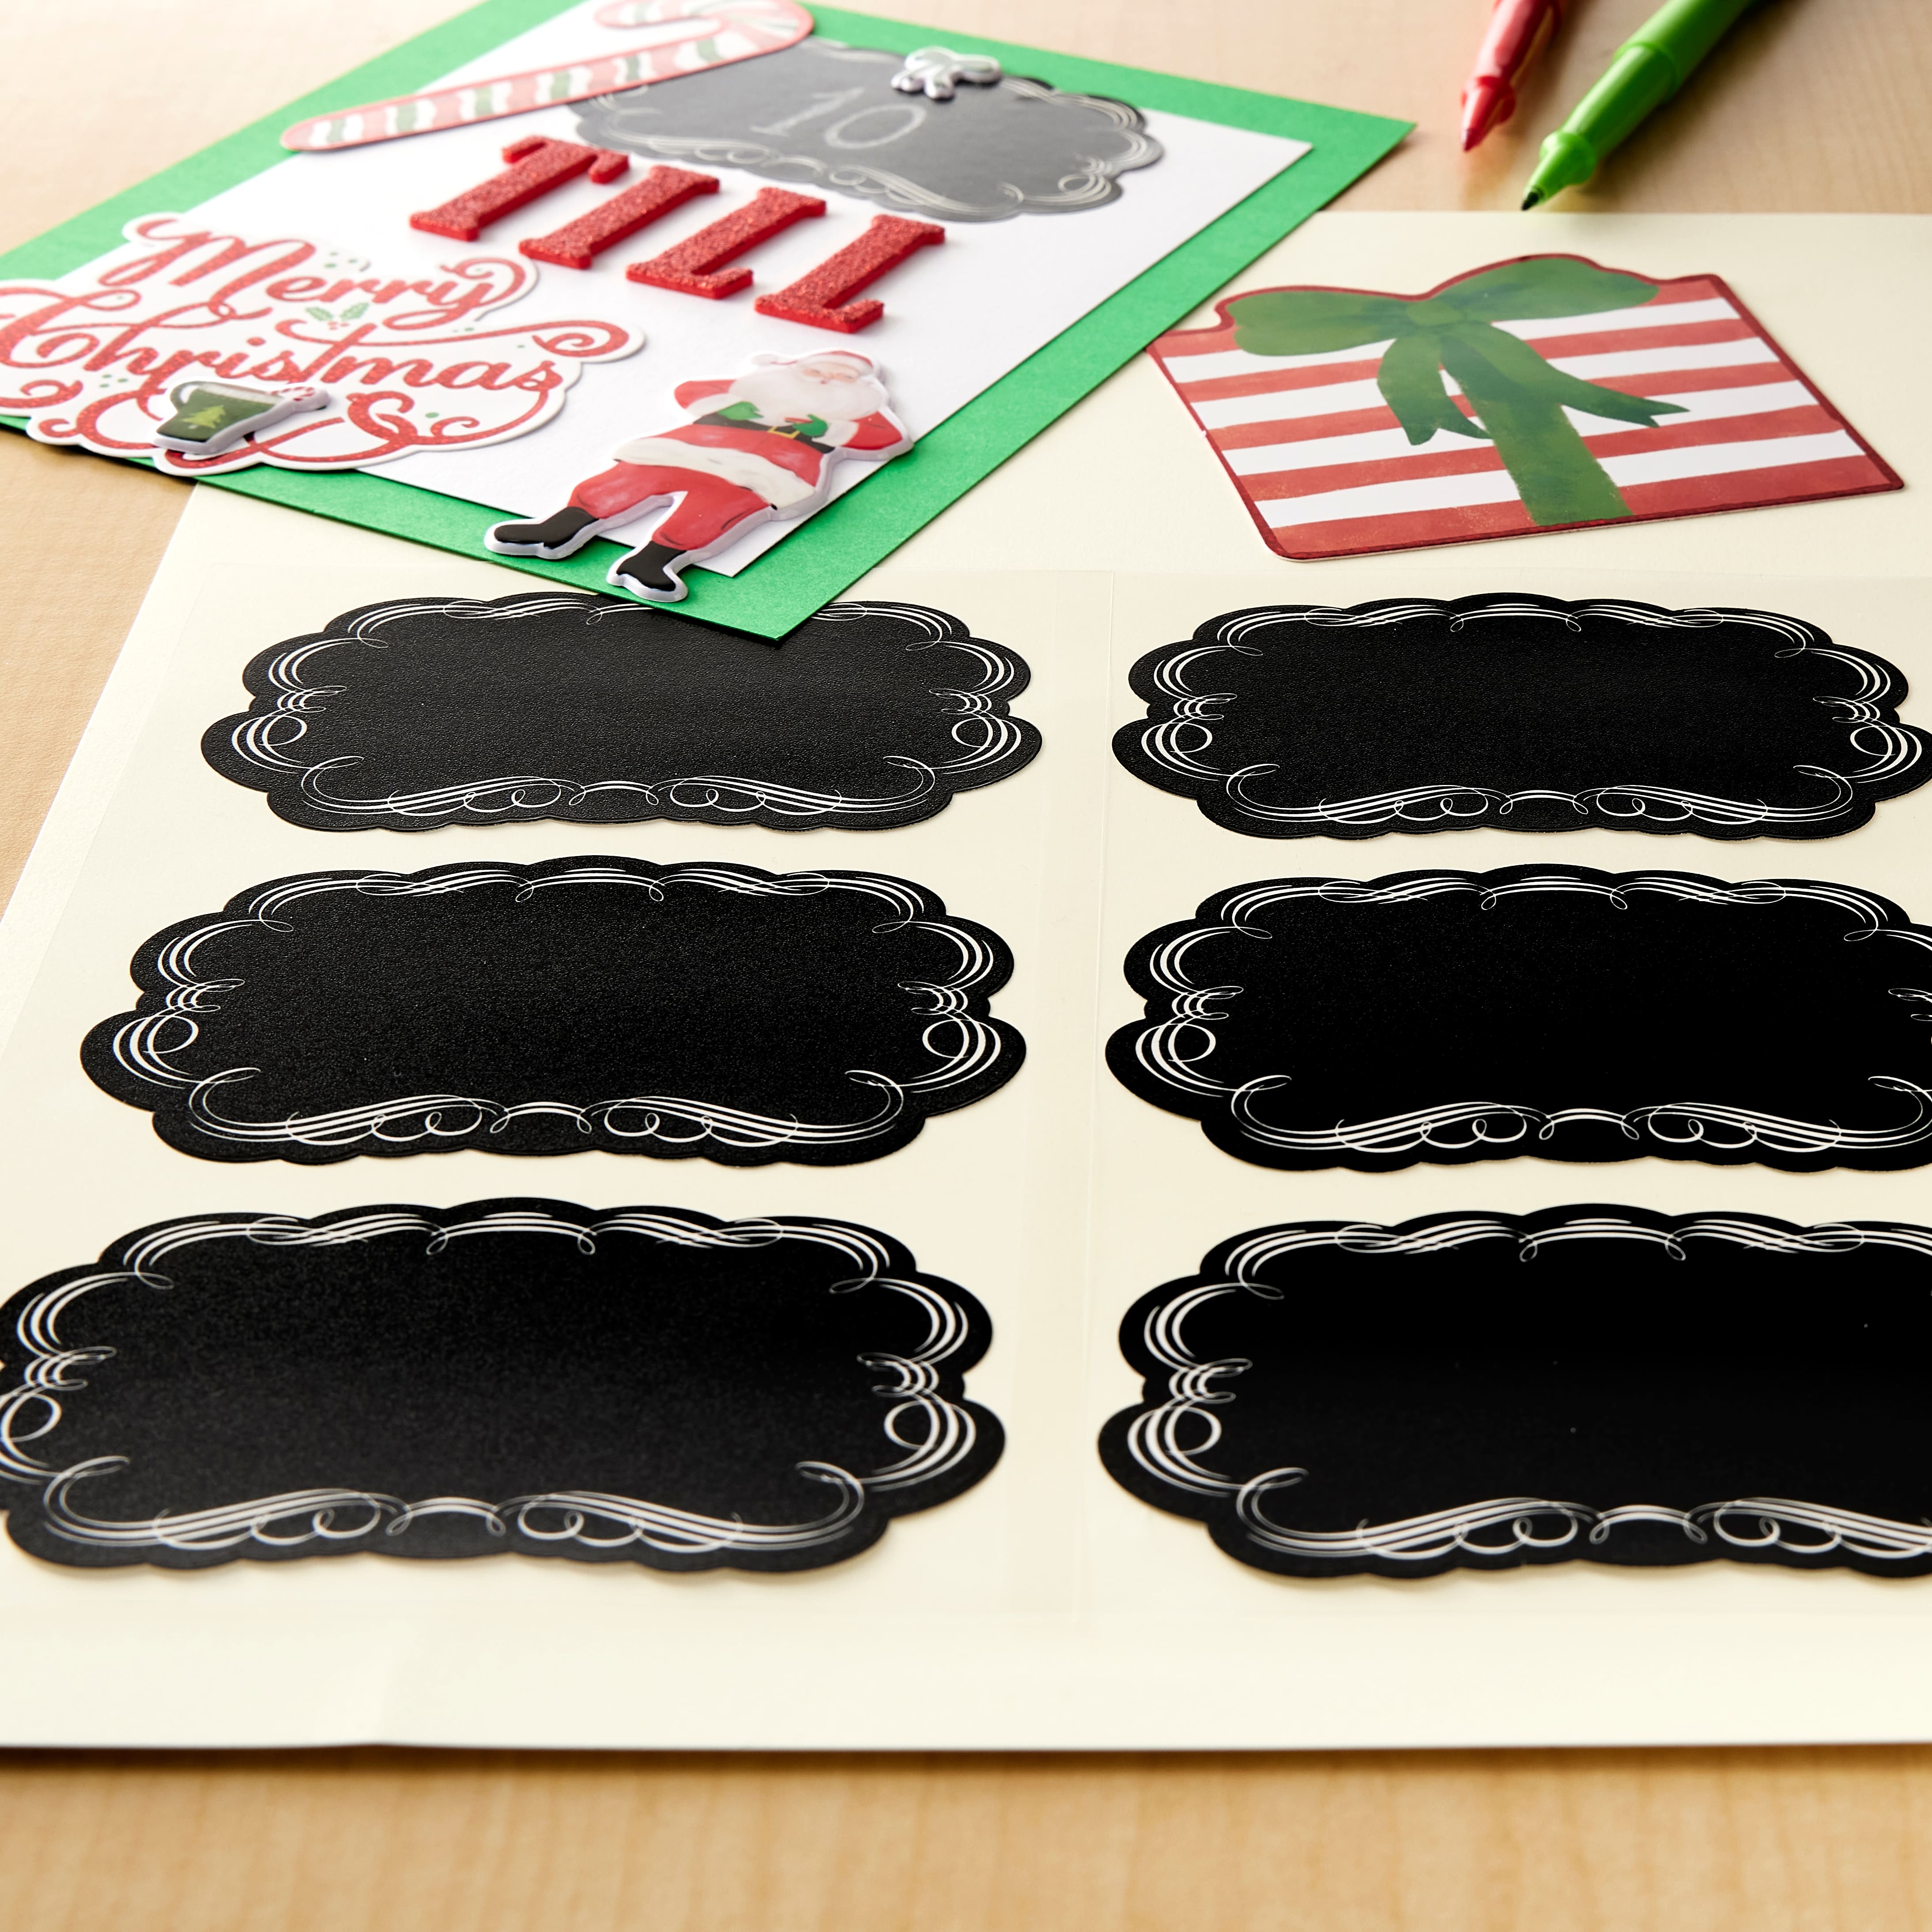 12 Packs: 9 ct. (108 total) Black Chalkboard Bubble Labels by Recollections&#x2122;